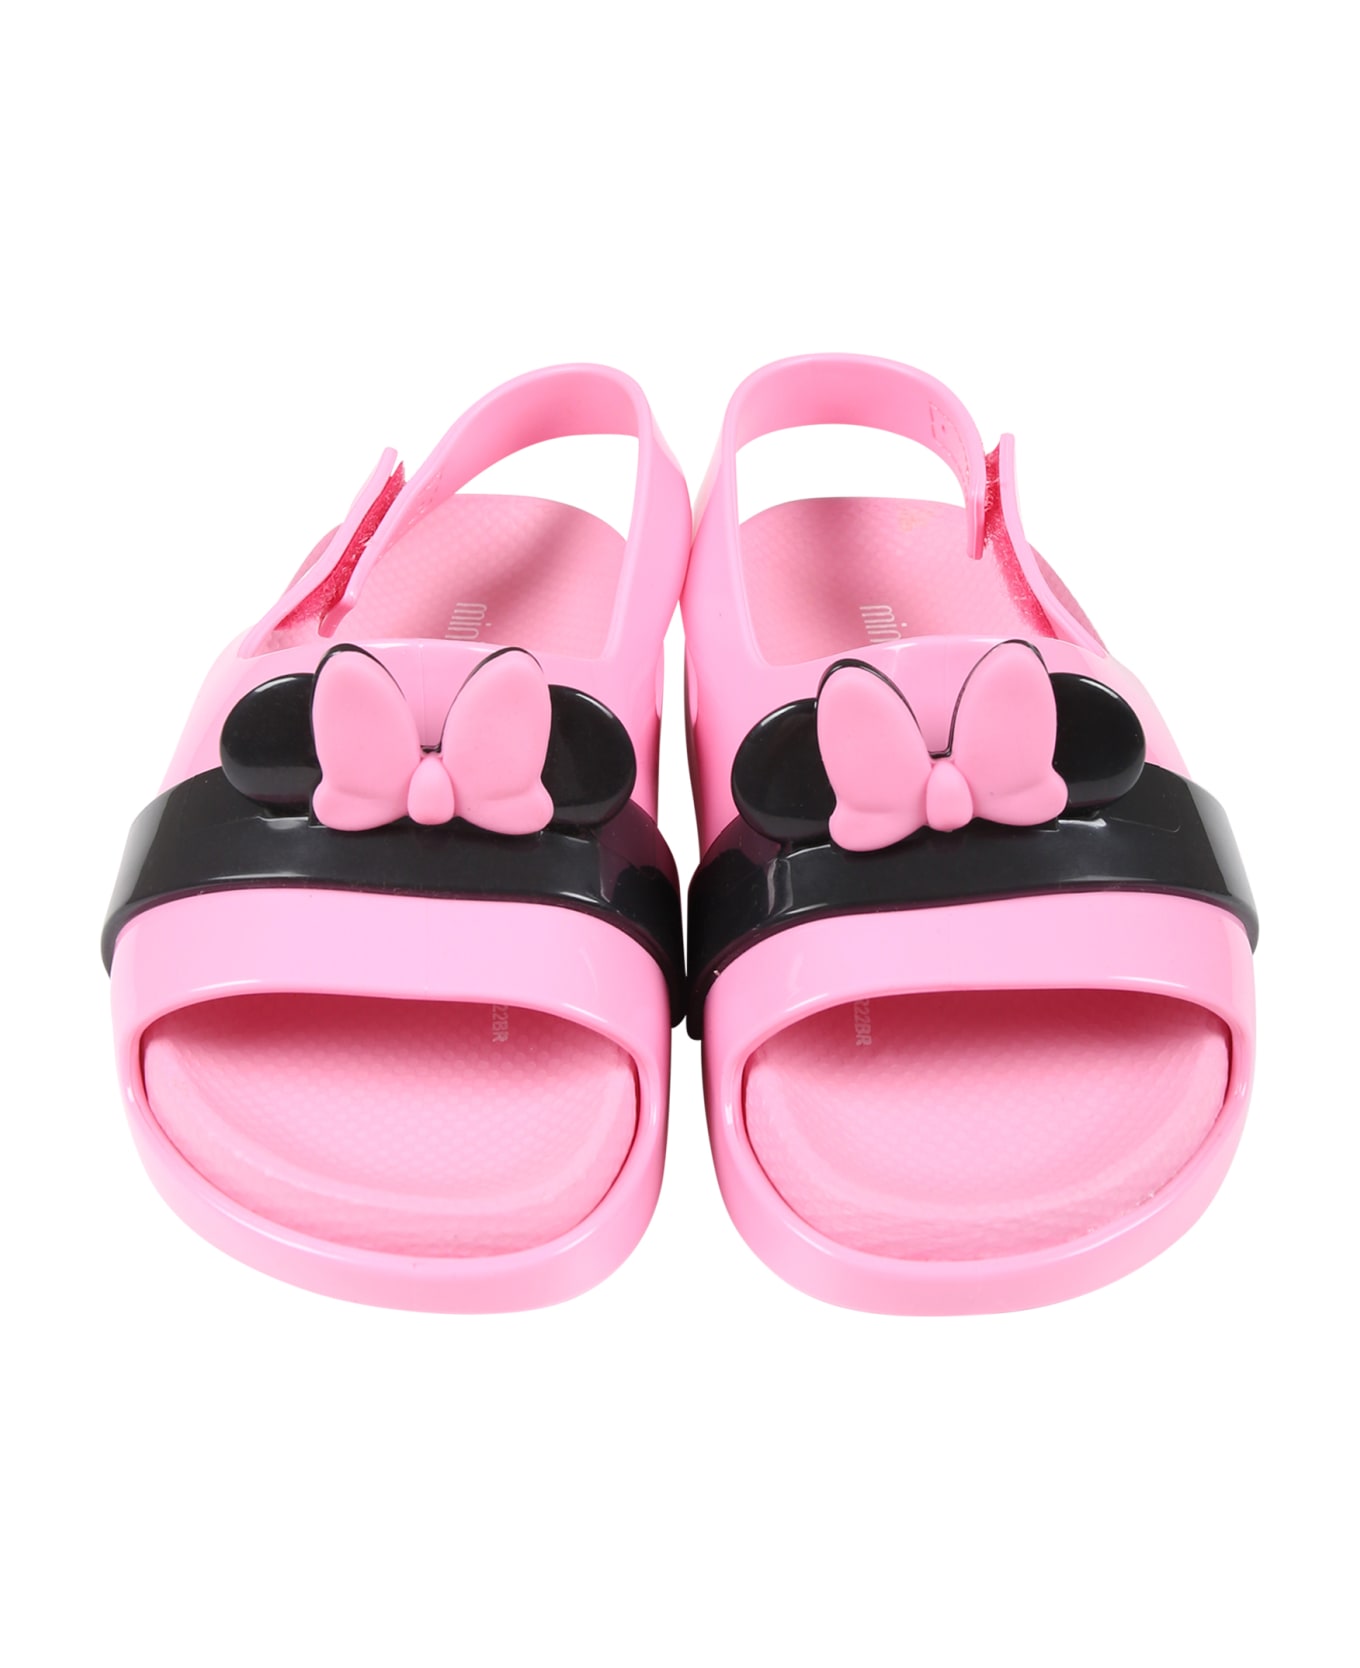 Melissa Pink Sandals For Girl With Minnie Ears - Pink